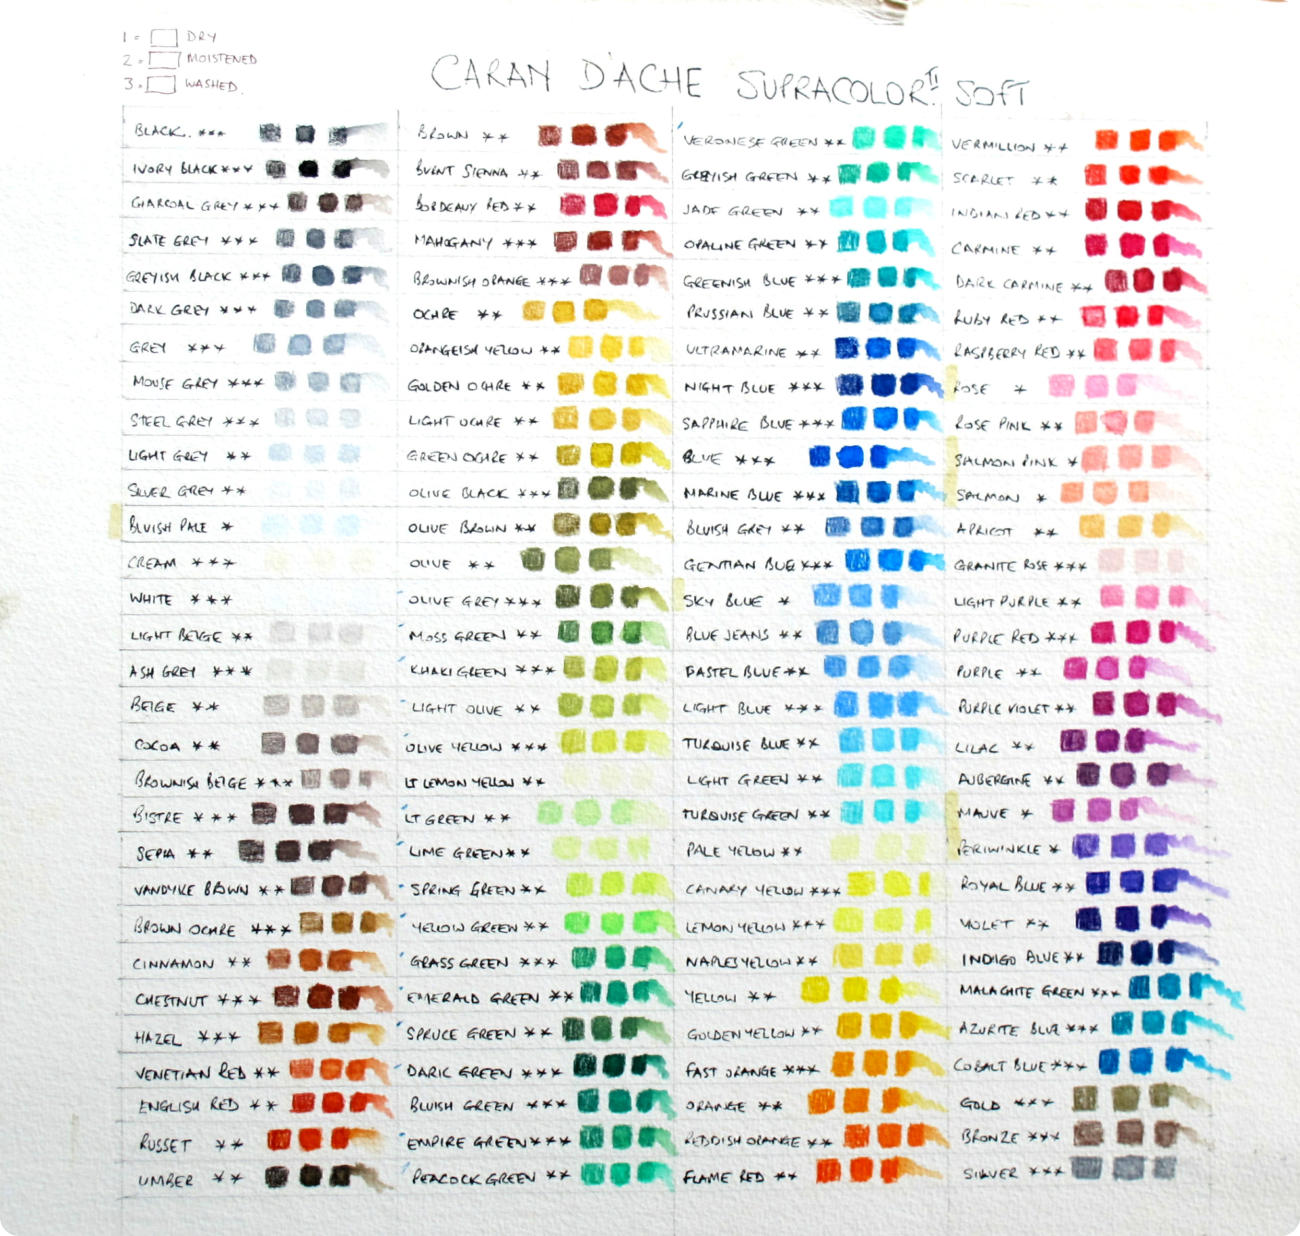 Rob's Art Supply Reviews: Caran d'Ache Supracolor Soft Watersoluble Colored  Pencils